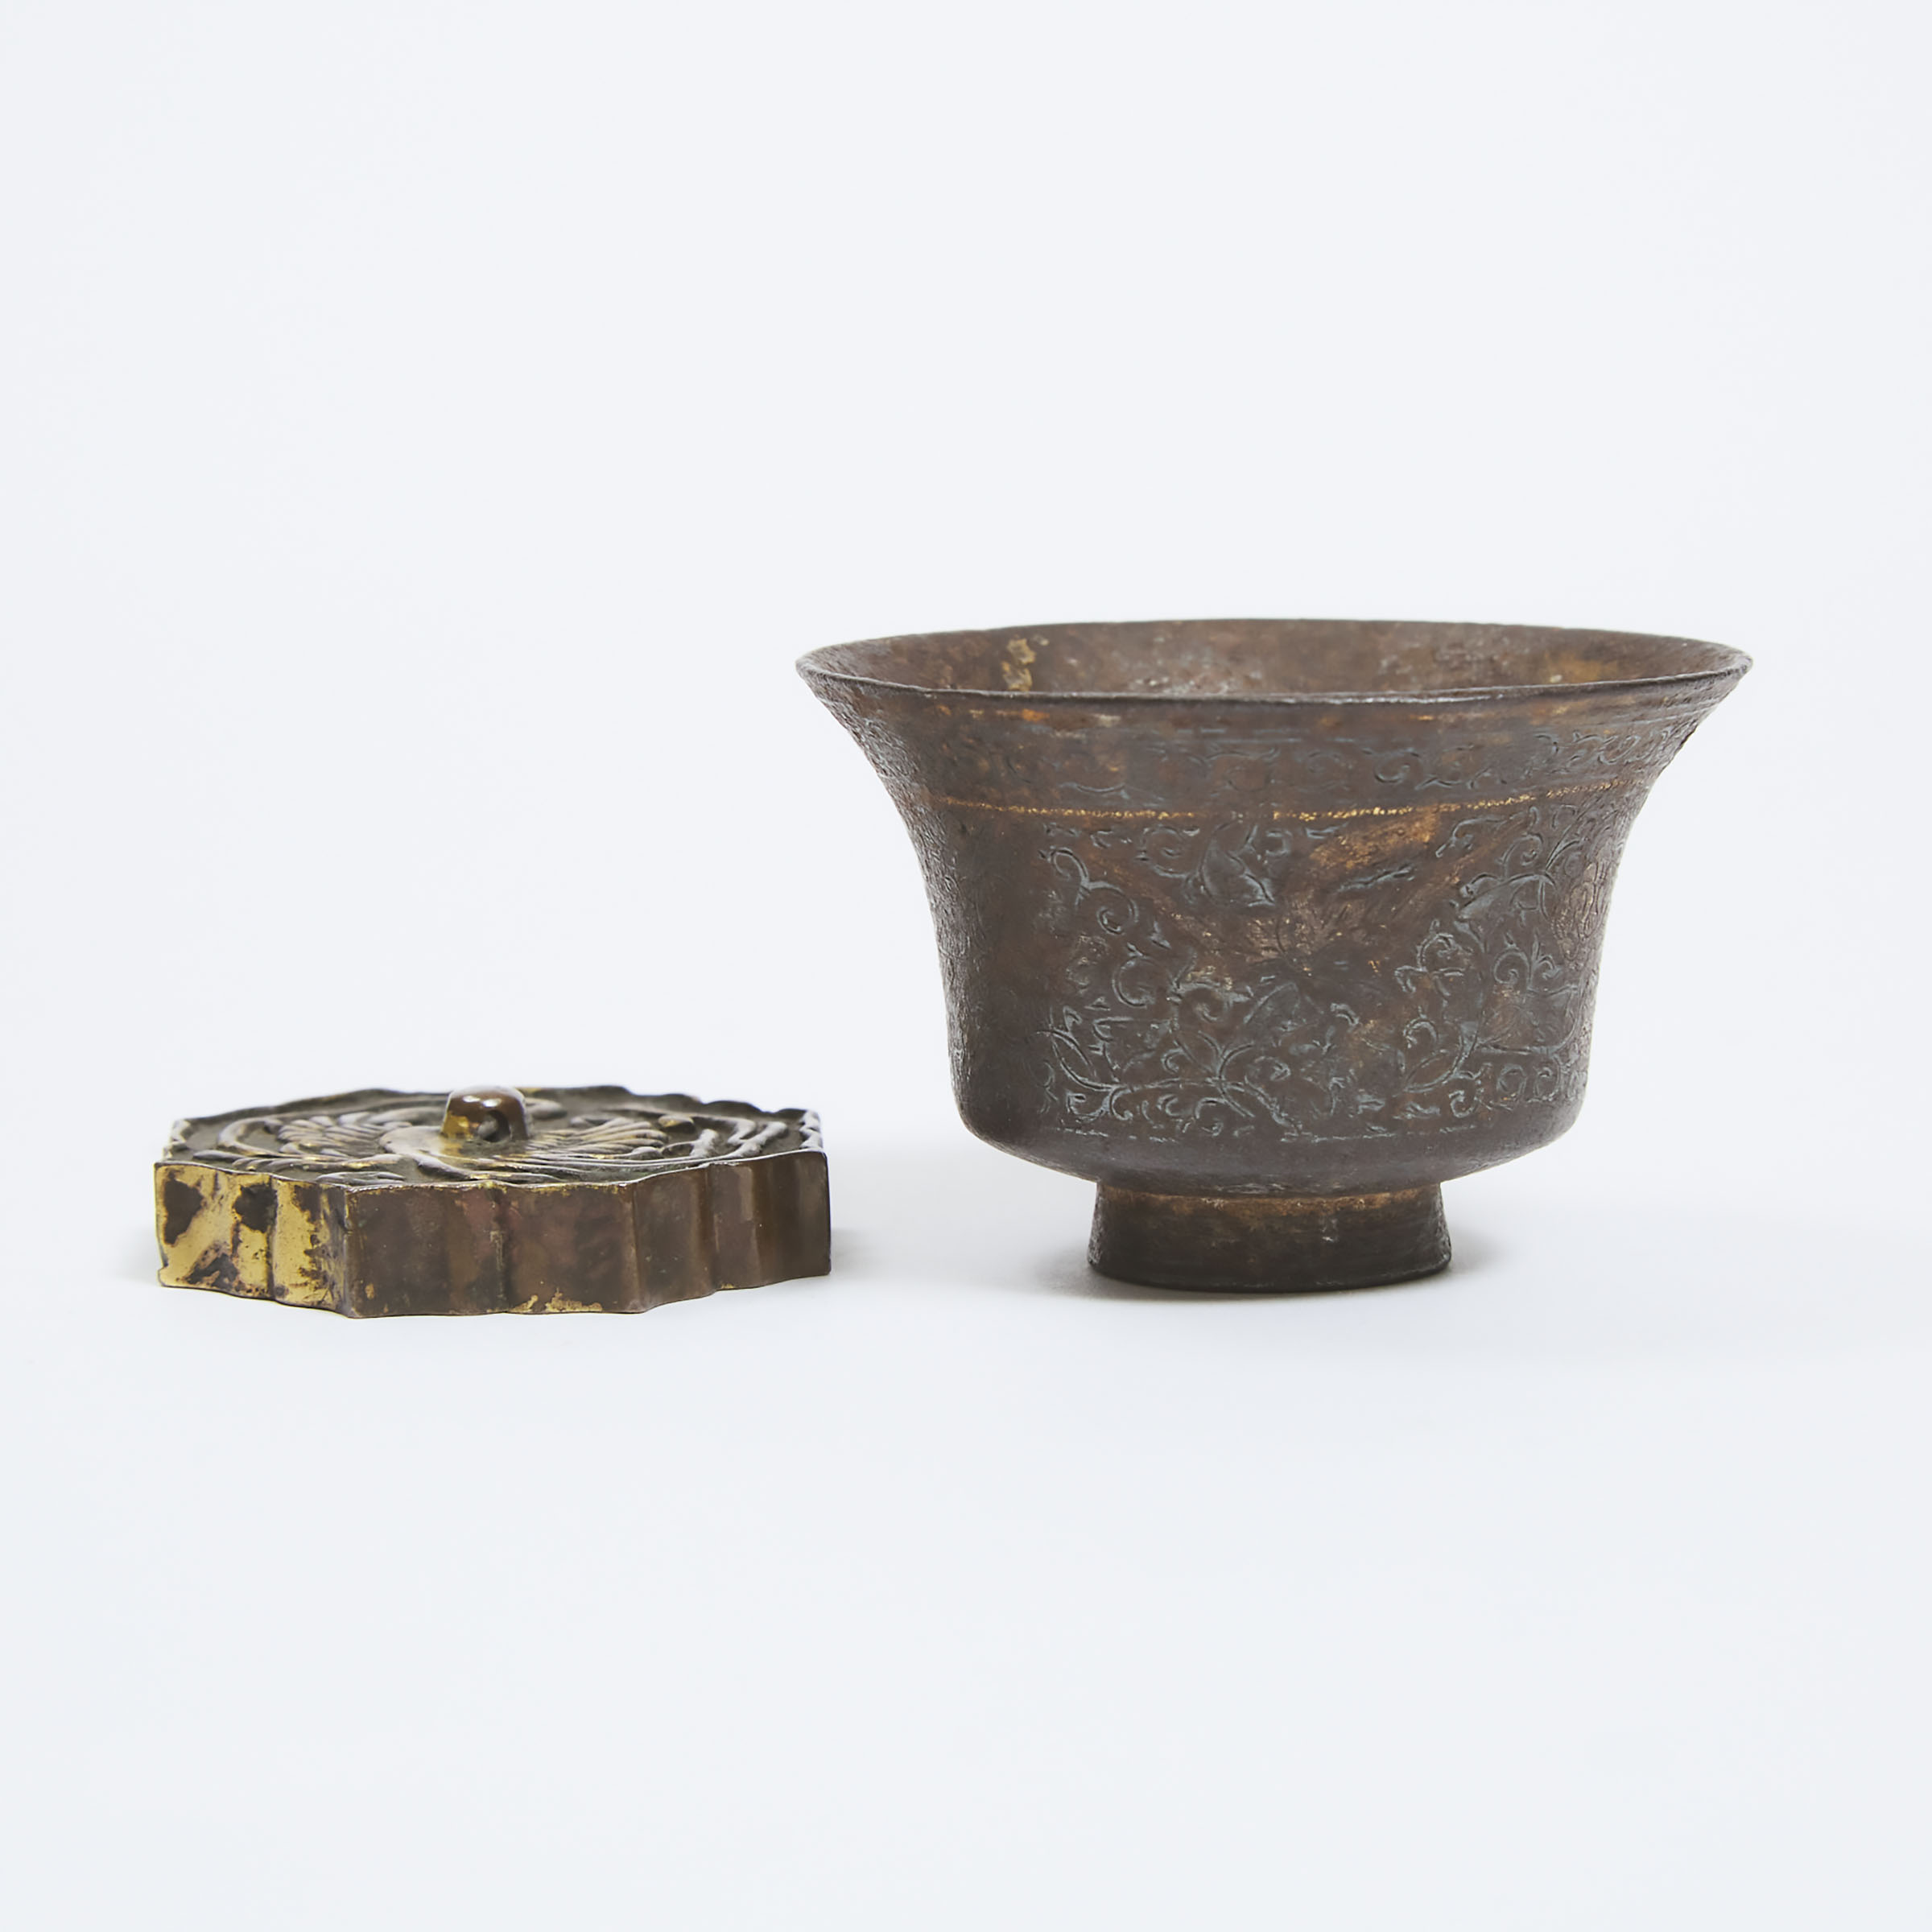 A Cast Silver Cup with Gilt Highlights, Together With a Gilt Bronze Paper Weight, Liao Dynasty or Later